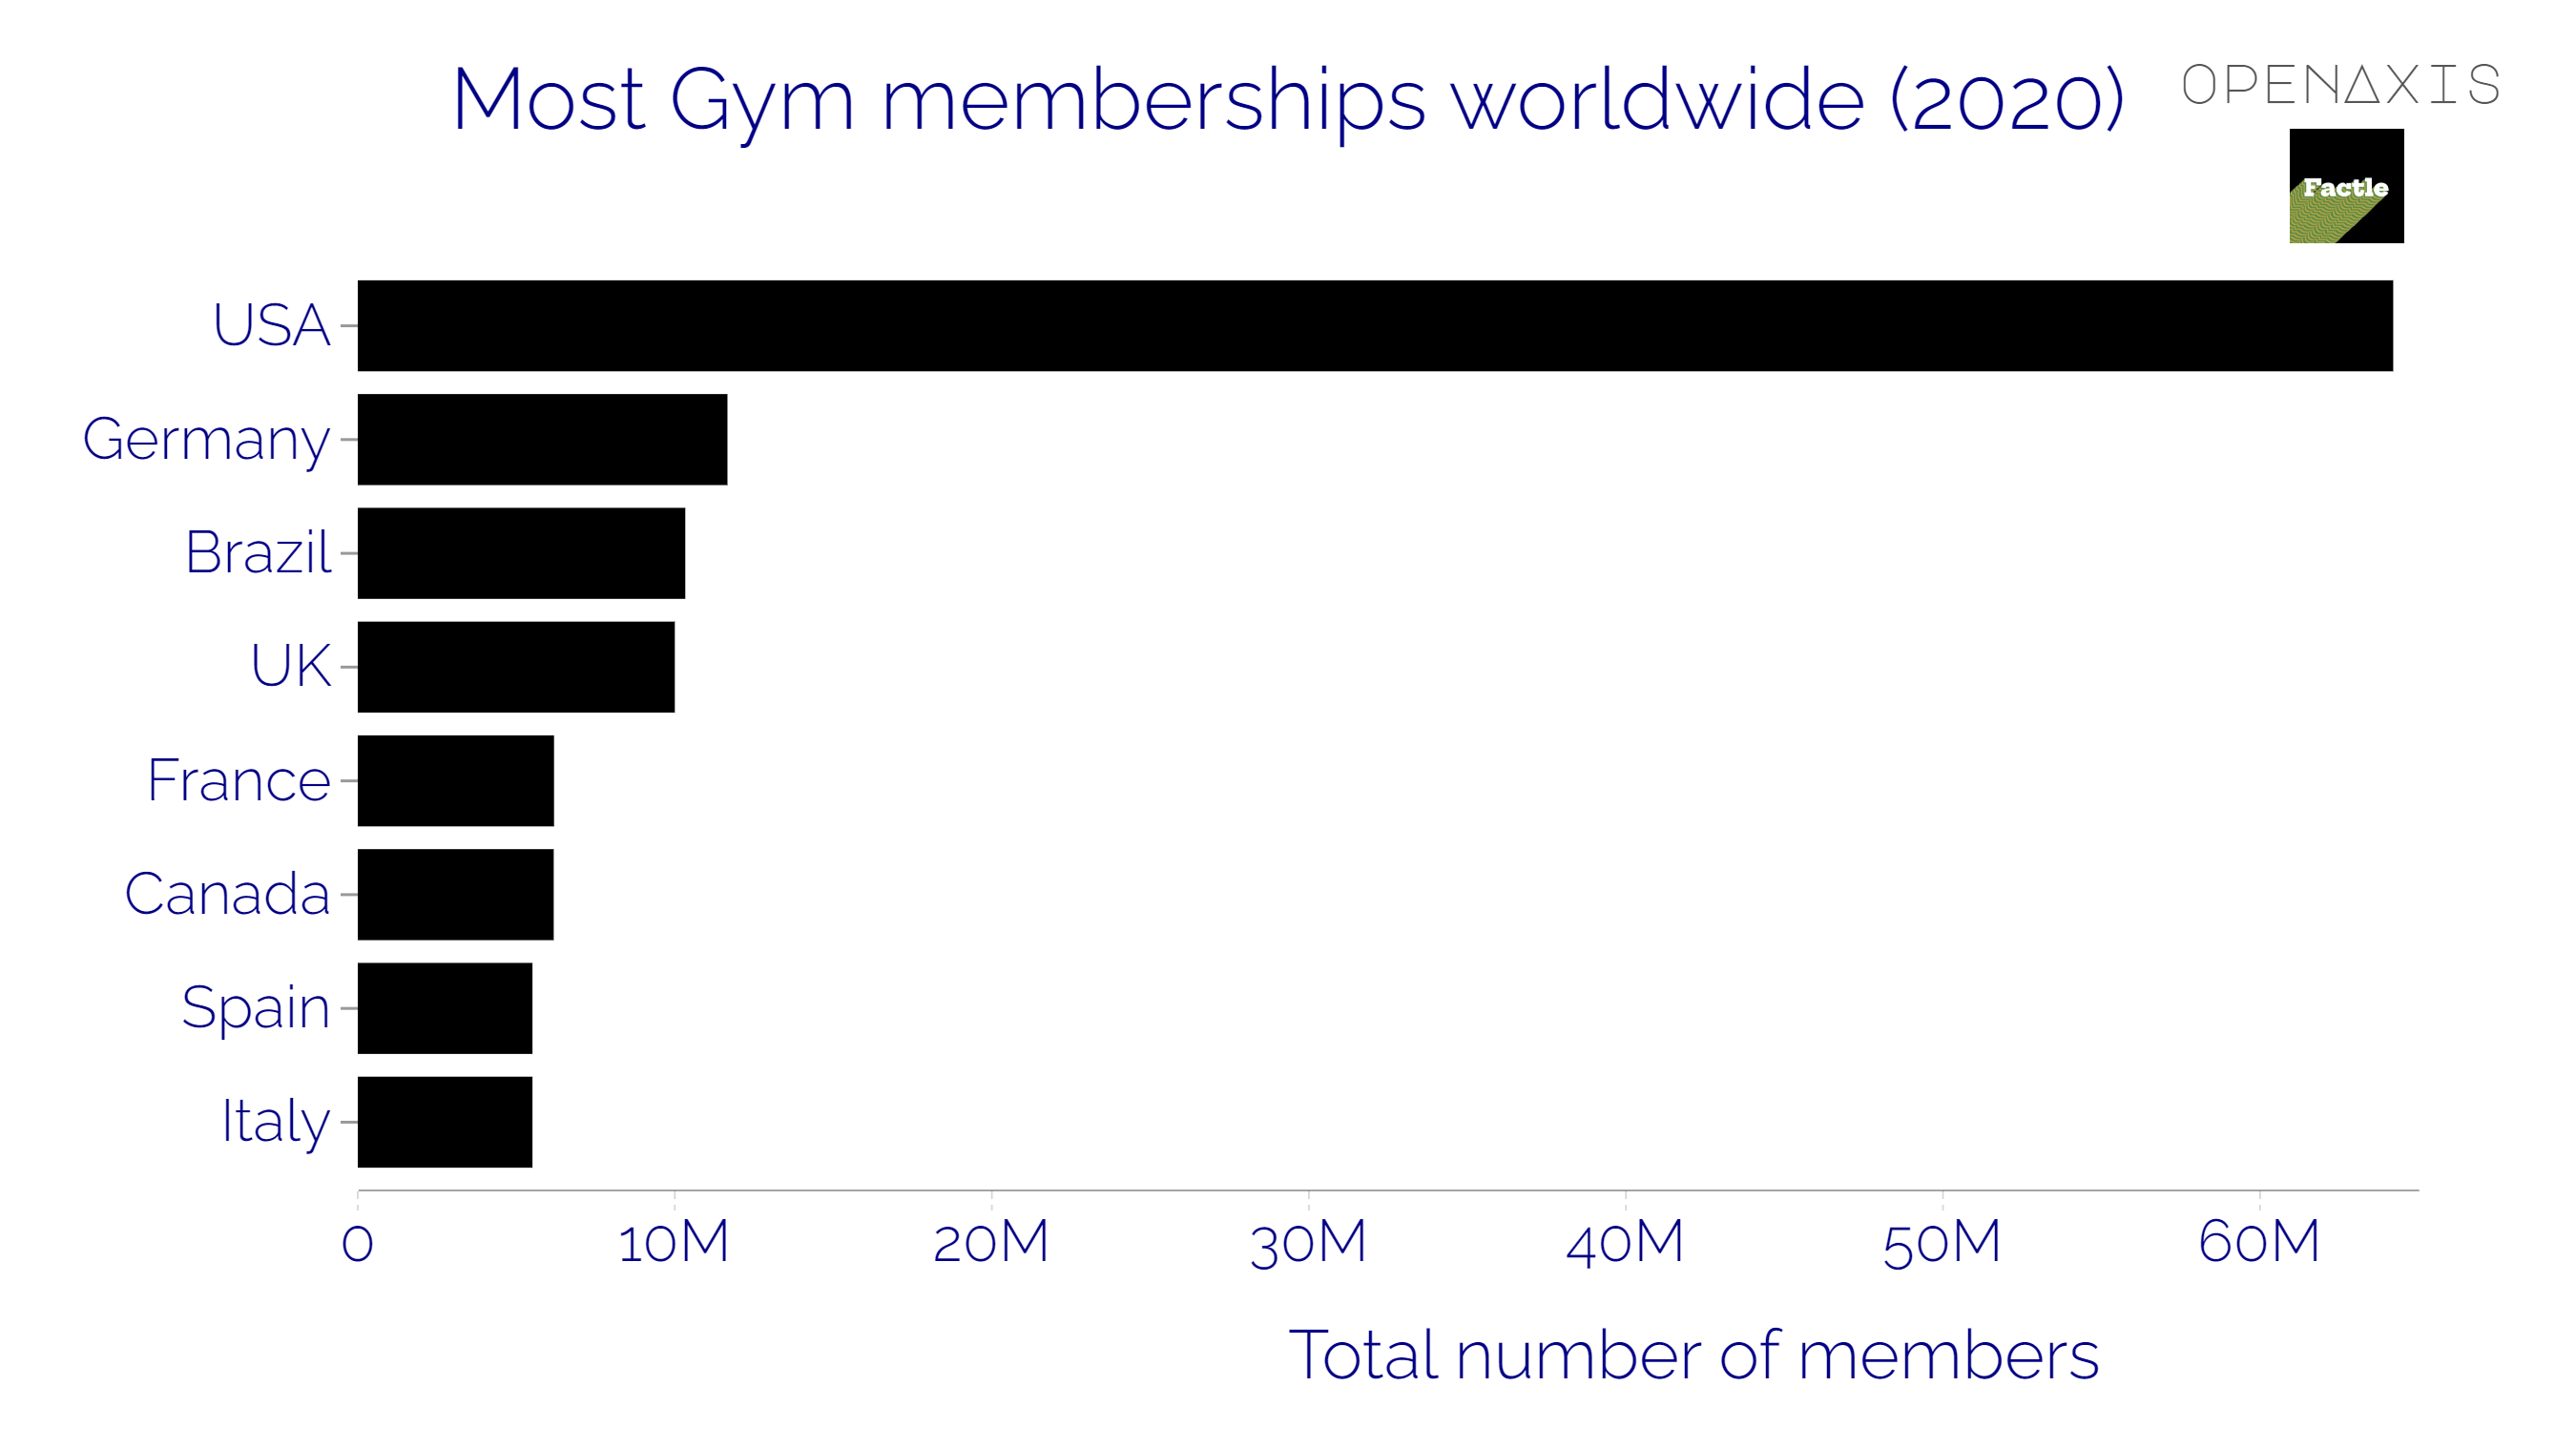 <p>There are a total of 184,608,505 gym members globally as of 2020, having grown 28% since 2010 and by 5.5% since 2018.</p><p><br /></p><p>As of 2020, the global gym industry was worth $96.7 billion with more than 184 million gym members in total.</p><p><br /></p><p>There are more than 205,000 gyms available to members worldwide.</p><p><br /></p><p>Sweden and Norway have the highest market penetration rates with 22%, while India has the lowest with only 0.15% of the population being a gym member.</p><p><br /></p><p>The United States' gym industry finished off 2019 with a recorded revenue of $35.03 billion dollars, the largest of any country. </p><p><br /></p><p>Check out the full dataset below, which includes total revenue, total gyms, total memberships, member penetration rate, members per gym, annual revenue per gym, and annual revenue per member, per country. </p><p><br /></p><p>Source: <a href="https://app.openaxis.com/data/3702" target="_blank">RunRepeat</a></p><p><br /></p>